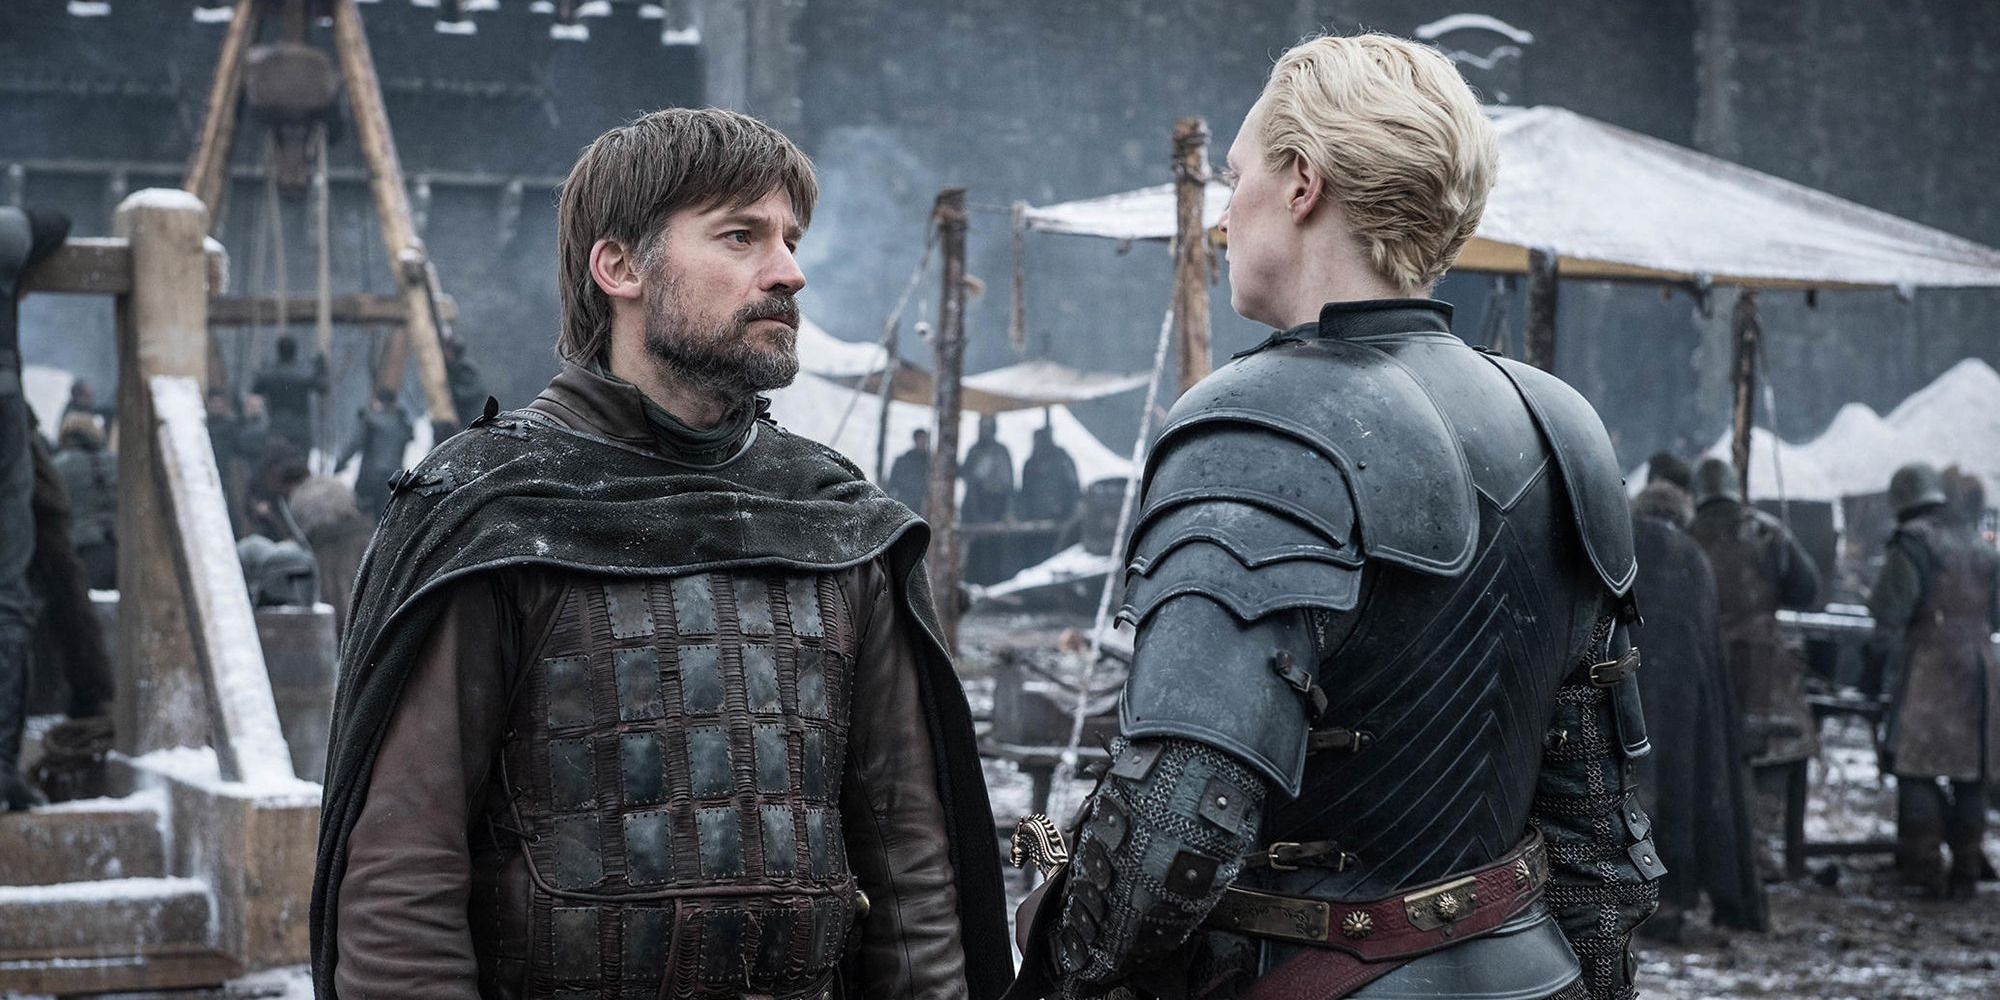 Jaime Lannister Game Of Thrones Quotes That Made Us Love Him (& Hate Him)